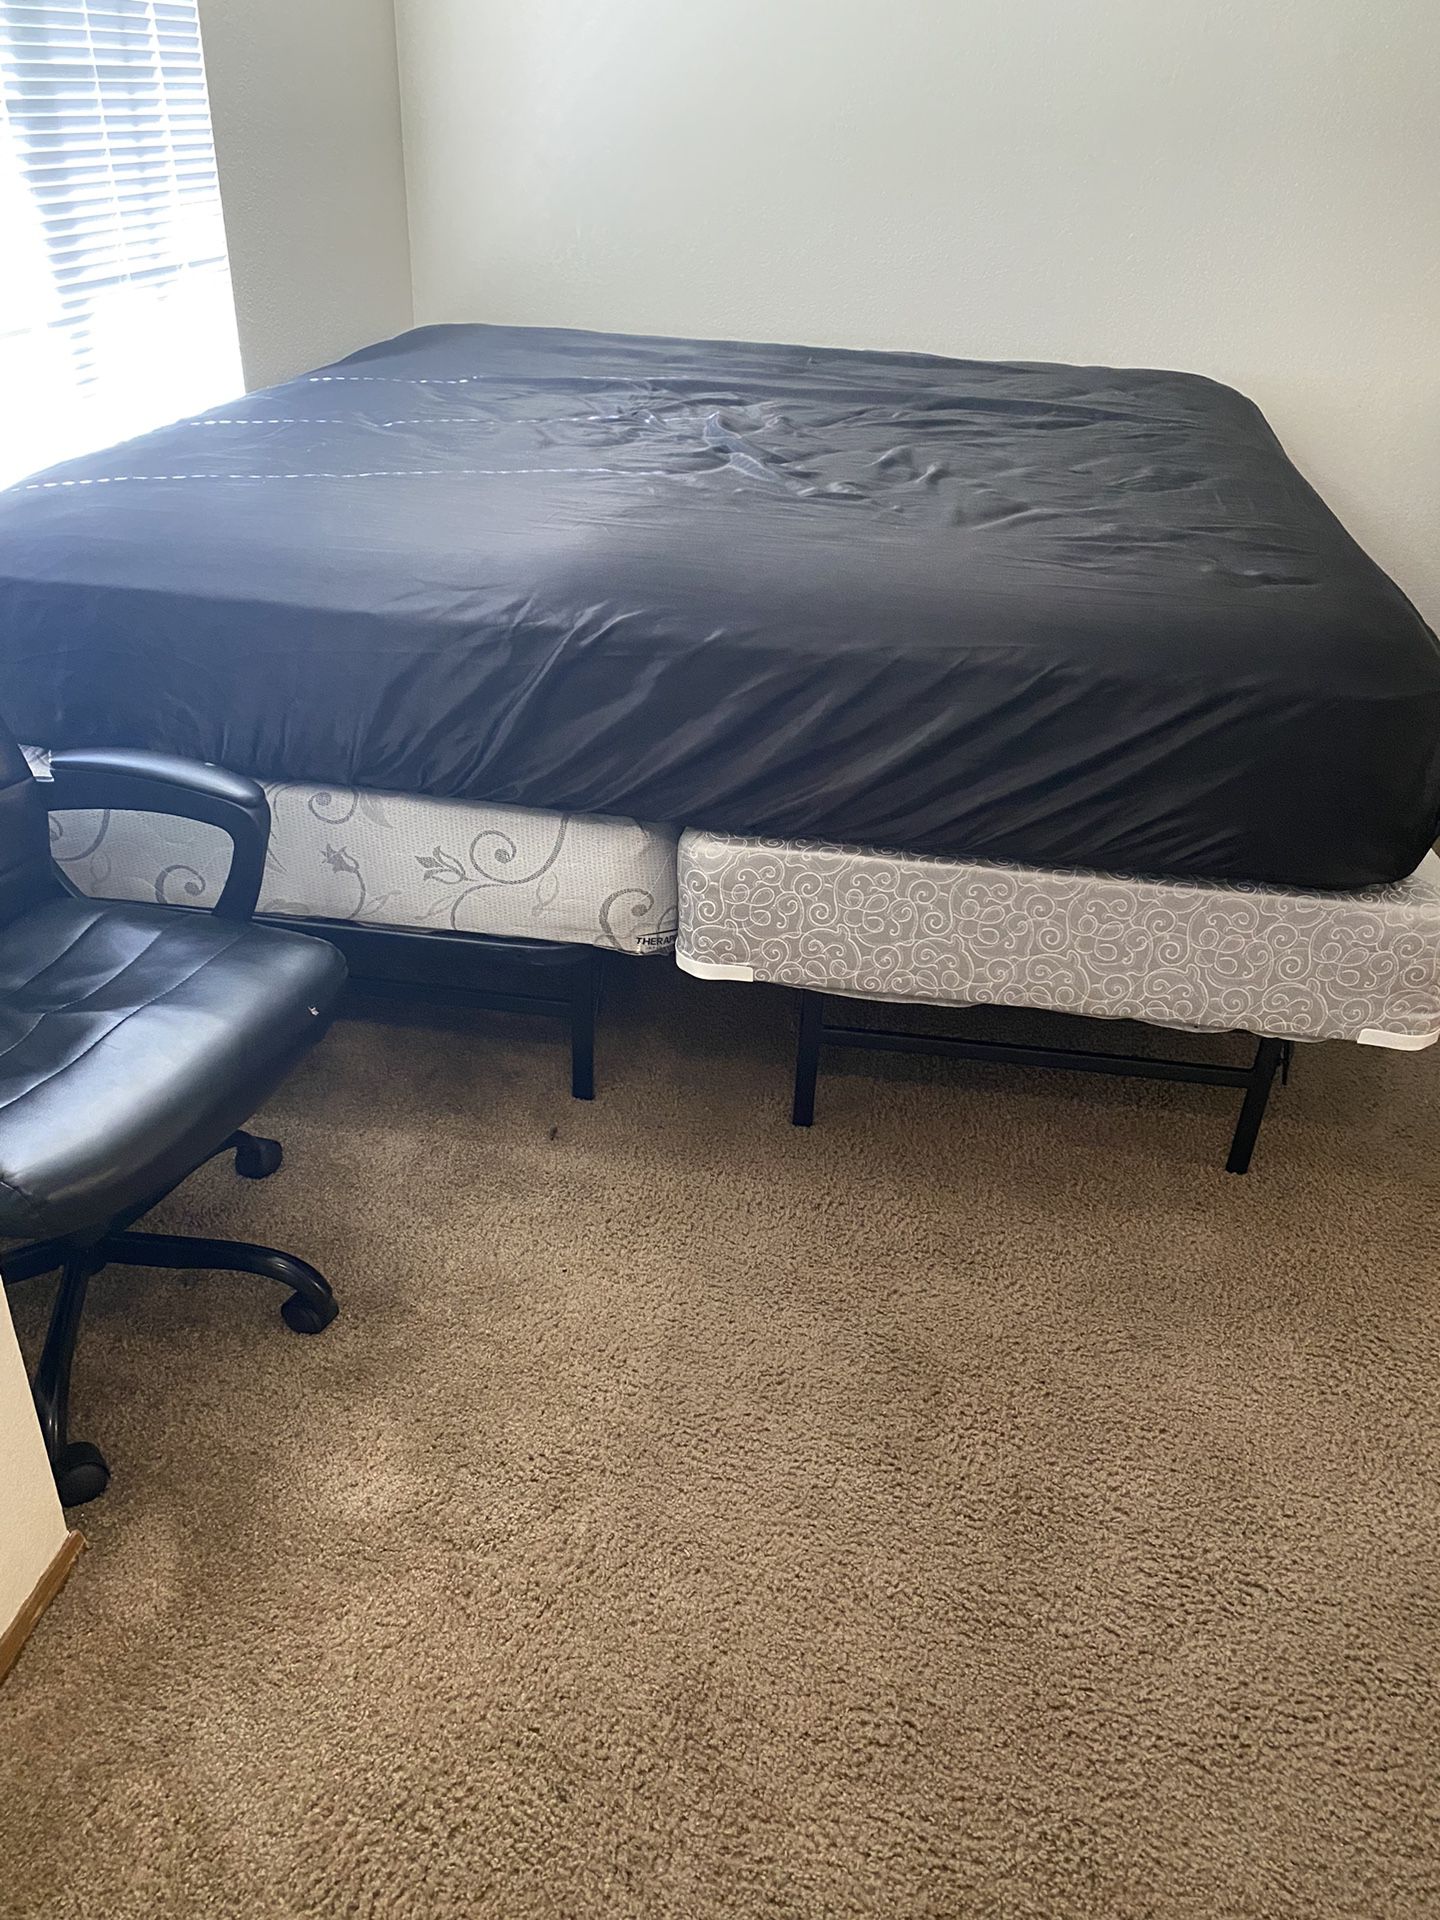 King Size Mattress, Box Springs And Frame